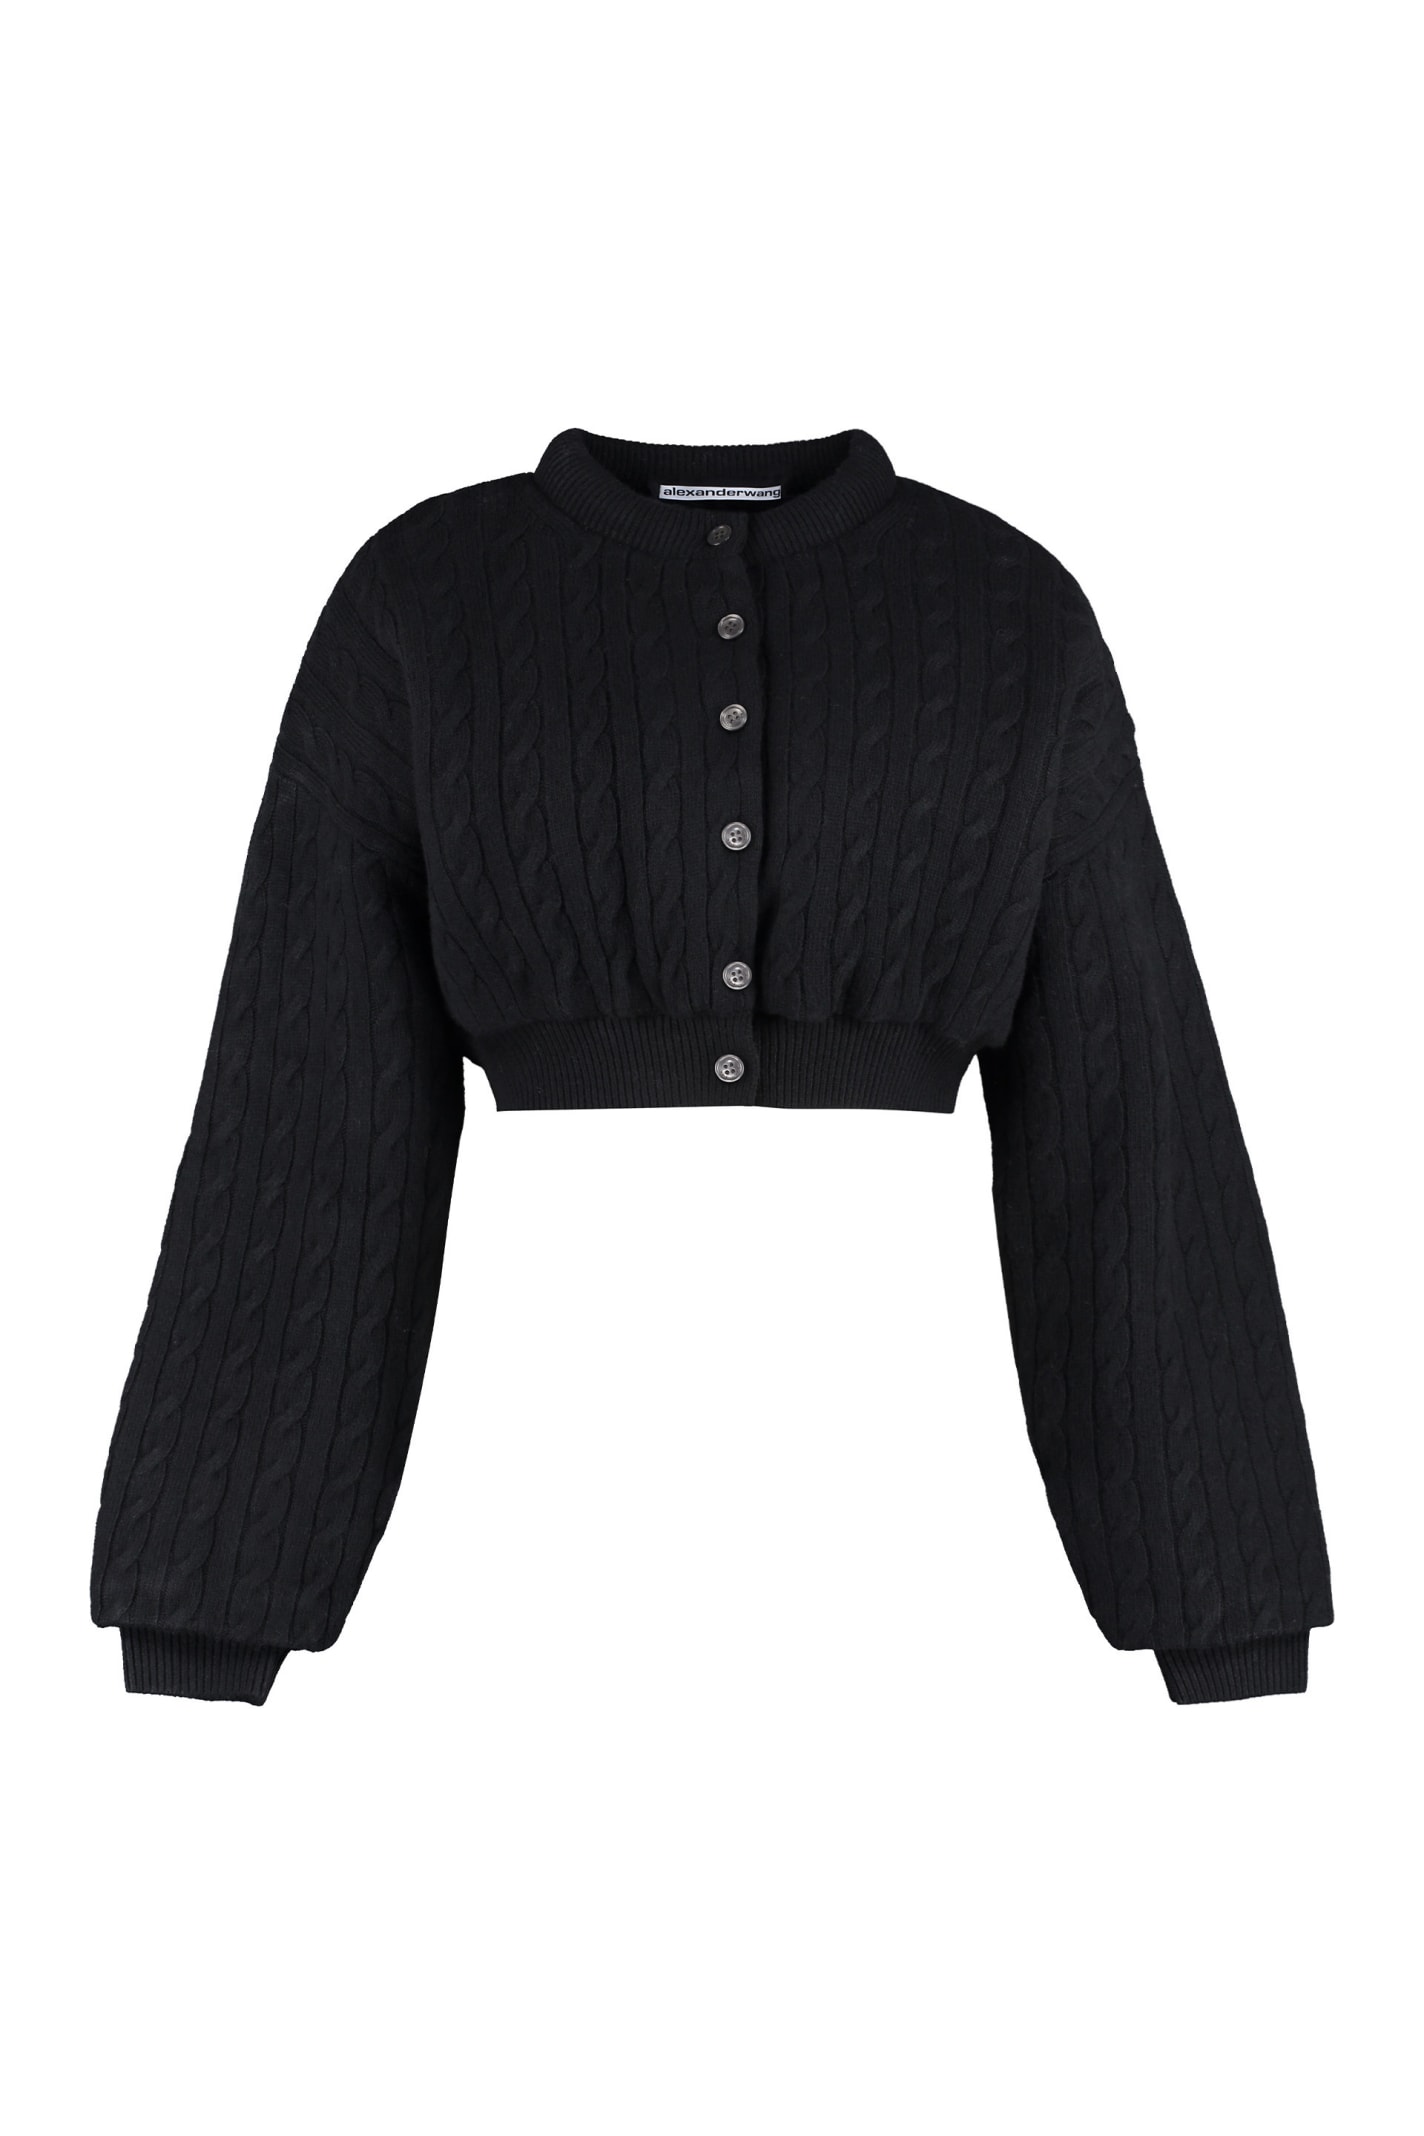 Alexander Wang Cropped-length Knitted Cardigan